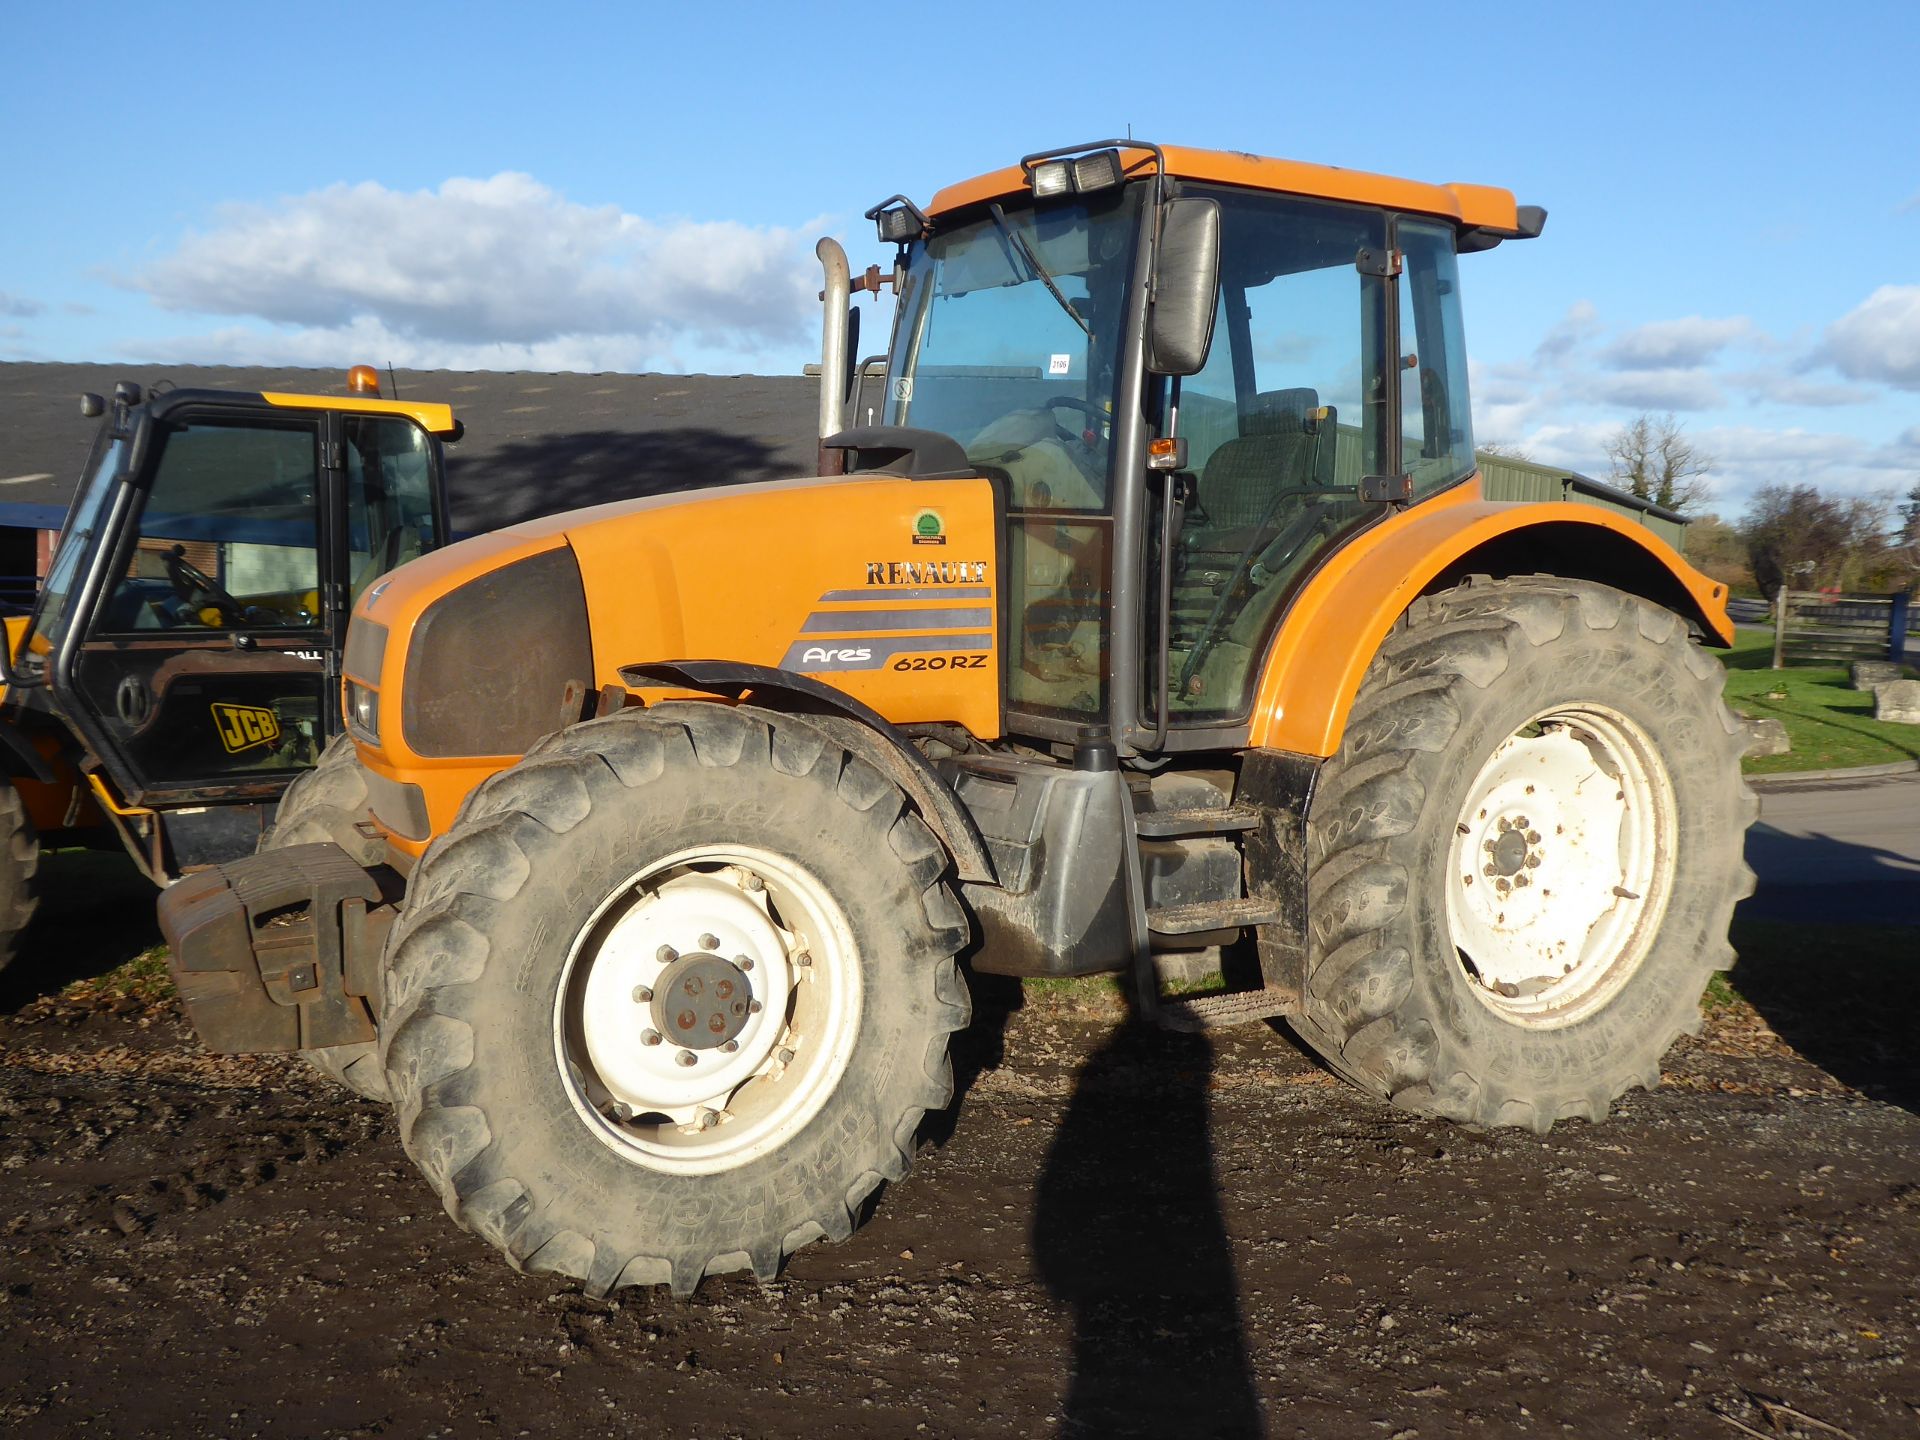 Renault Ares 620RZ tractor, X379 WTN